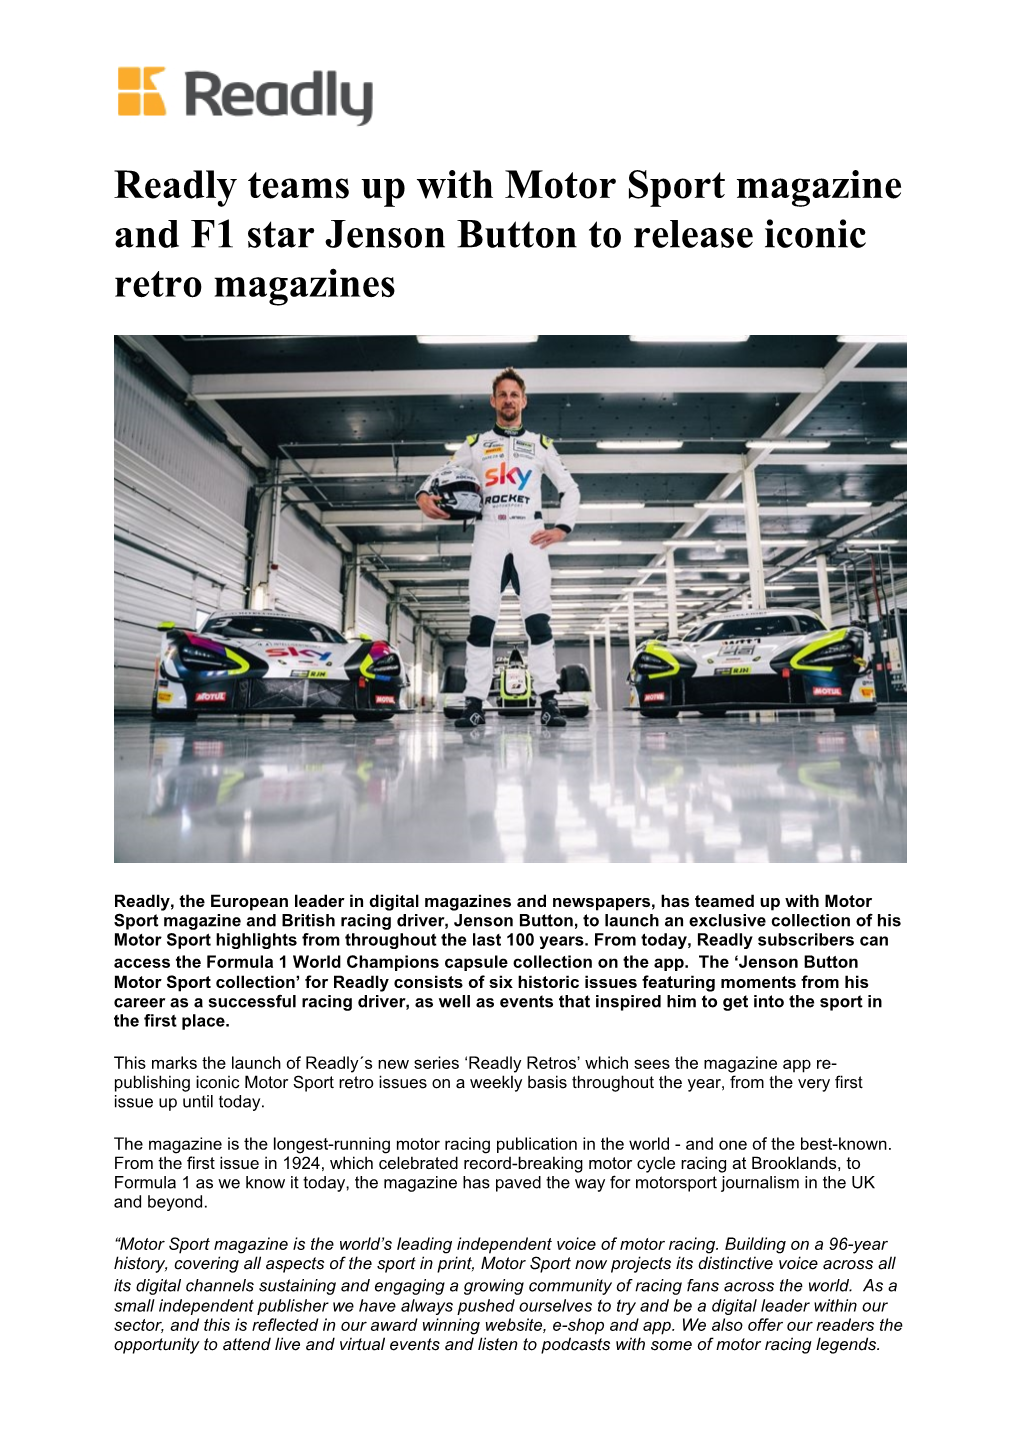 Readly Teams up with Motor Sport Magazine and F1 Star Jenson Button to Release Iconic Retro Magazines